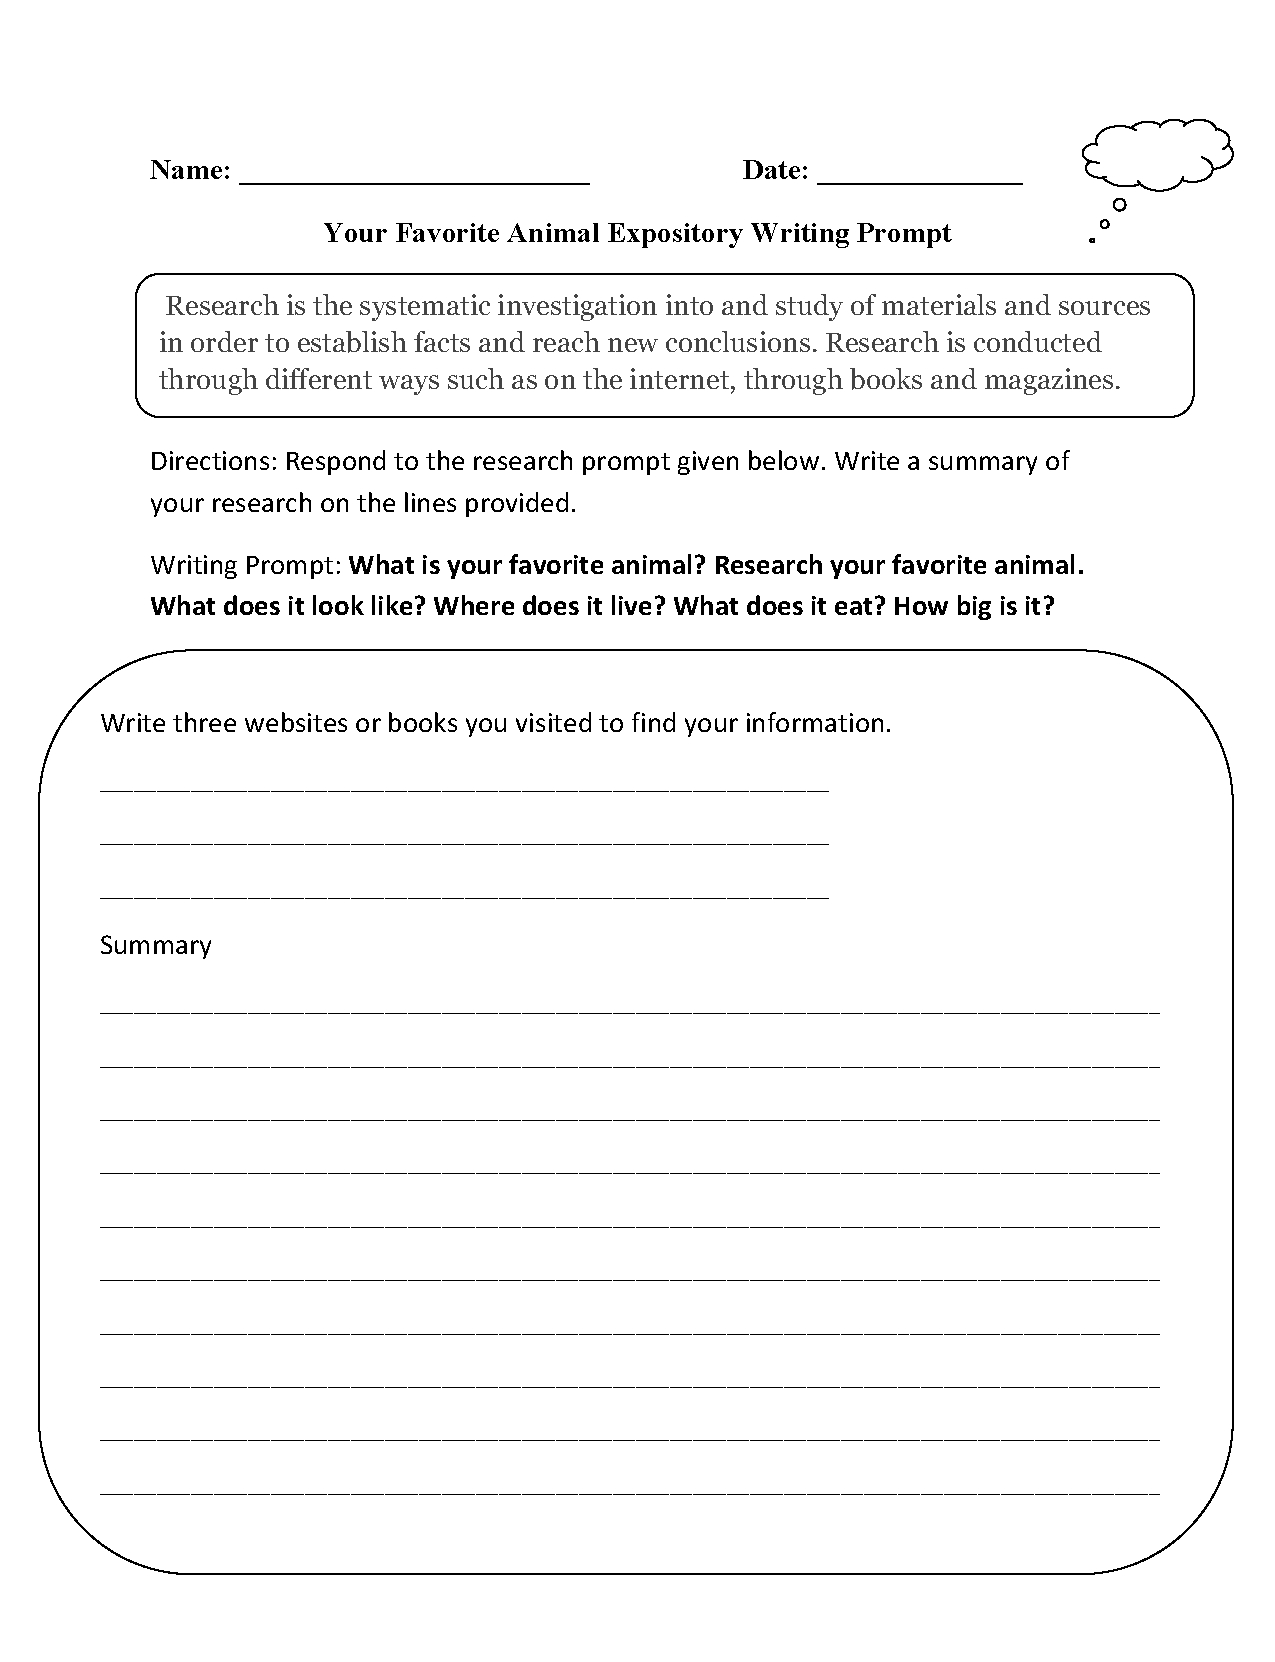 Englishlinx | Writing Prompts Worksheets - Free Printable Writing Prompts For Middle School